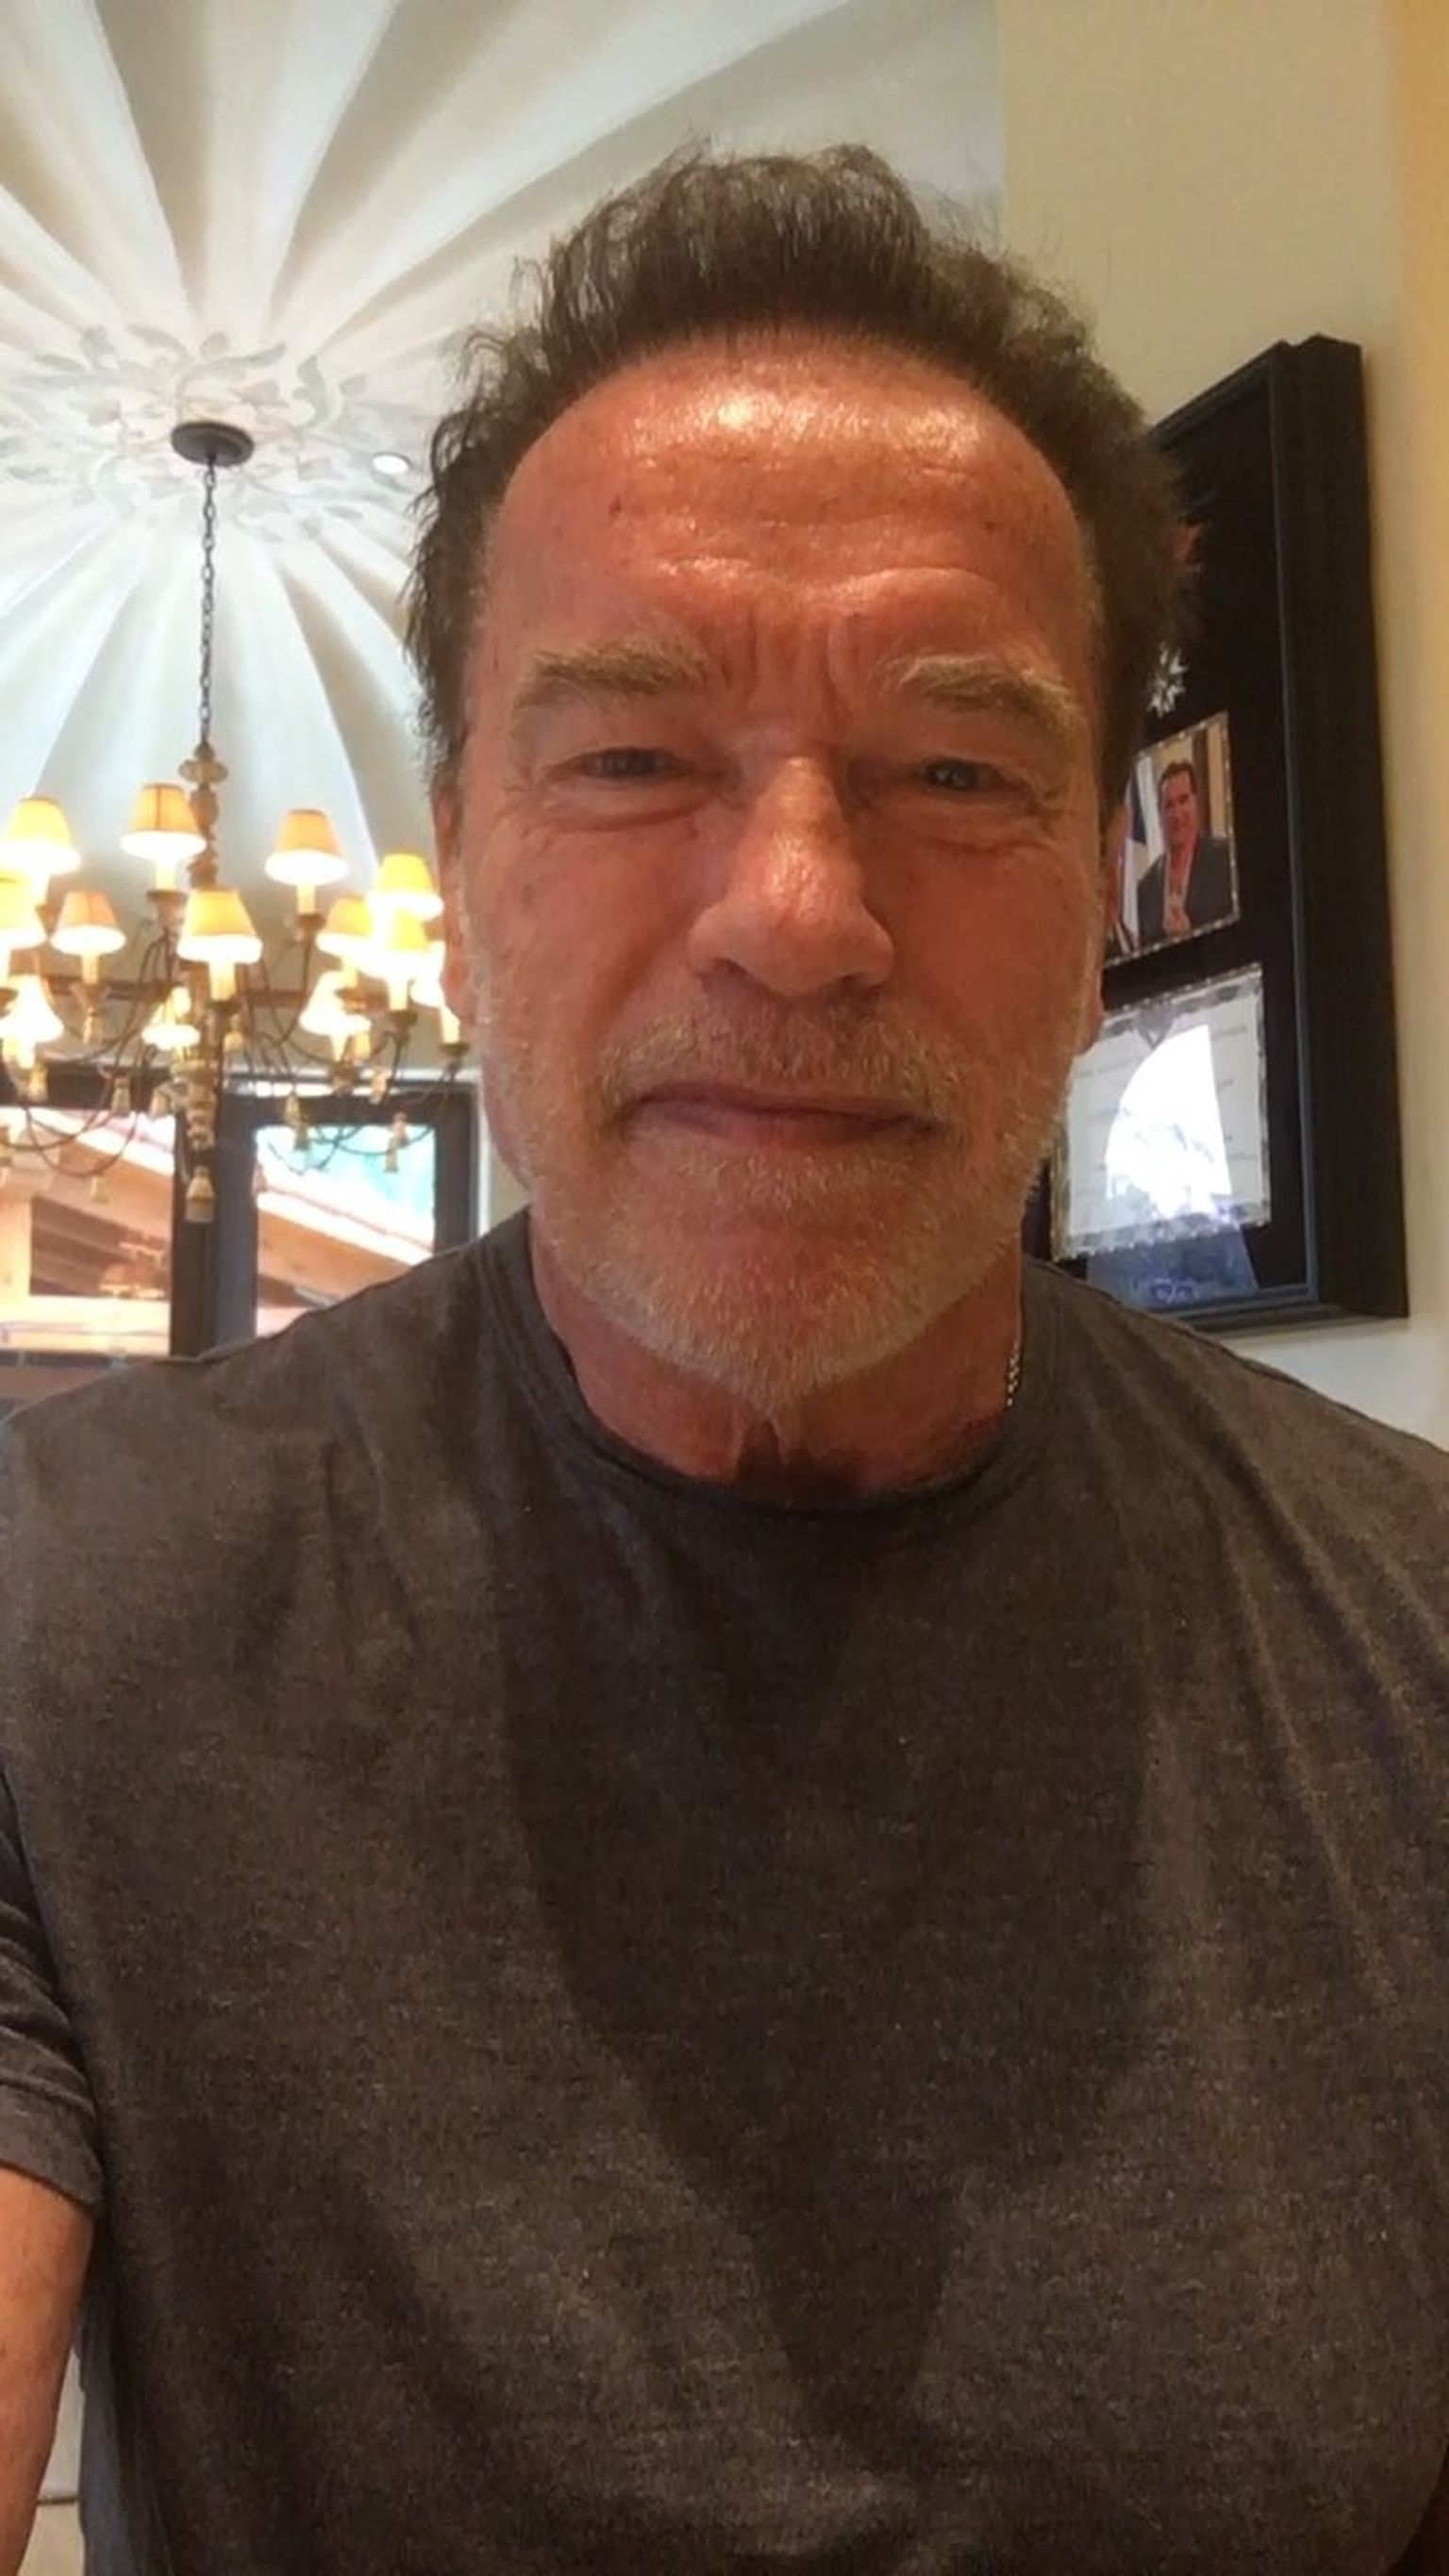 Arnold Schwarzenegger releases a photo on Instagram with the following caption: "This morning on Good Morning America, Chef Andre Rush - the chef you\u2019ve heard about with biceps that put all of us to shame - nominated me to #Flex4Forces. Thank you to Chef Rush and all of our real action heroes who make this country great.". Photo Credit: Instagram *** No USA Distribution *** For Editorial Use Only *** Not to be Published in Books or Photo Books ***  Please note: Fees charged by the agency are for the agency’s services only, and do not, nor are they intended to, convey to the user any ownership of Copyright or License in the material. The agency does not claim any ownership including but not limited to Copyright or License in the attached material. By publishing this material you expressly agree to indemnify and to hold the agency and its directors, shareholders and employees harmless from any loss, claims, damages, demands, expenses (including legal fees), or any causes of action or allegation against the agency arising out of or connected in any way with publication of the material.